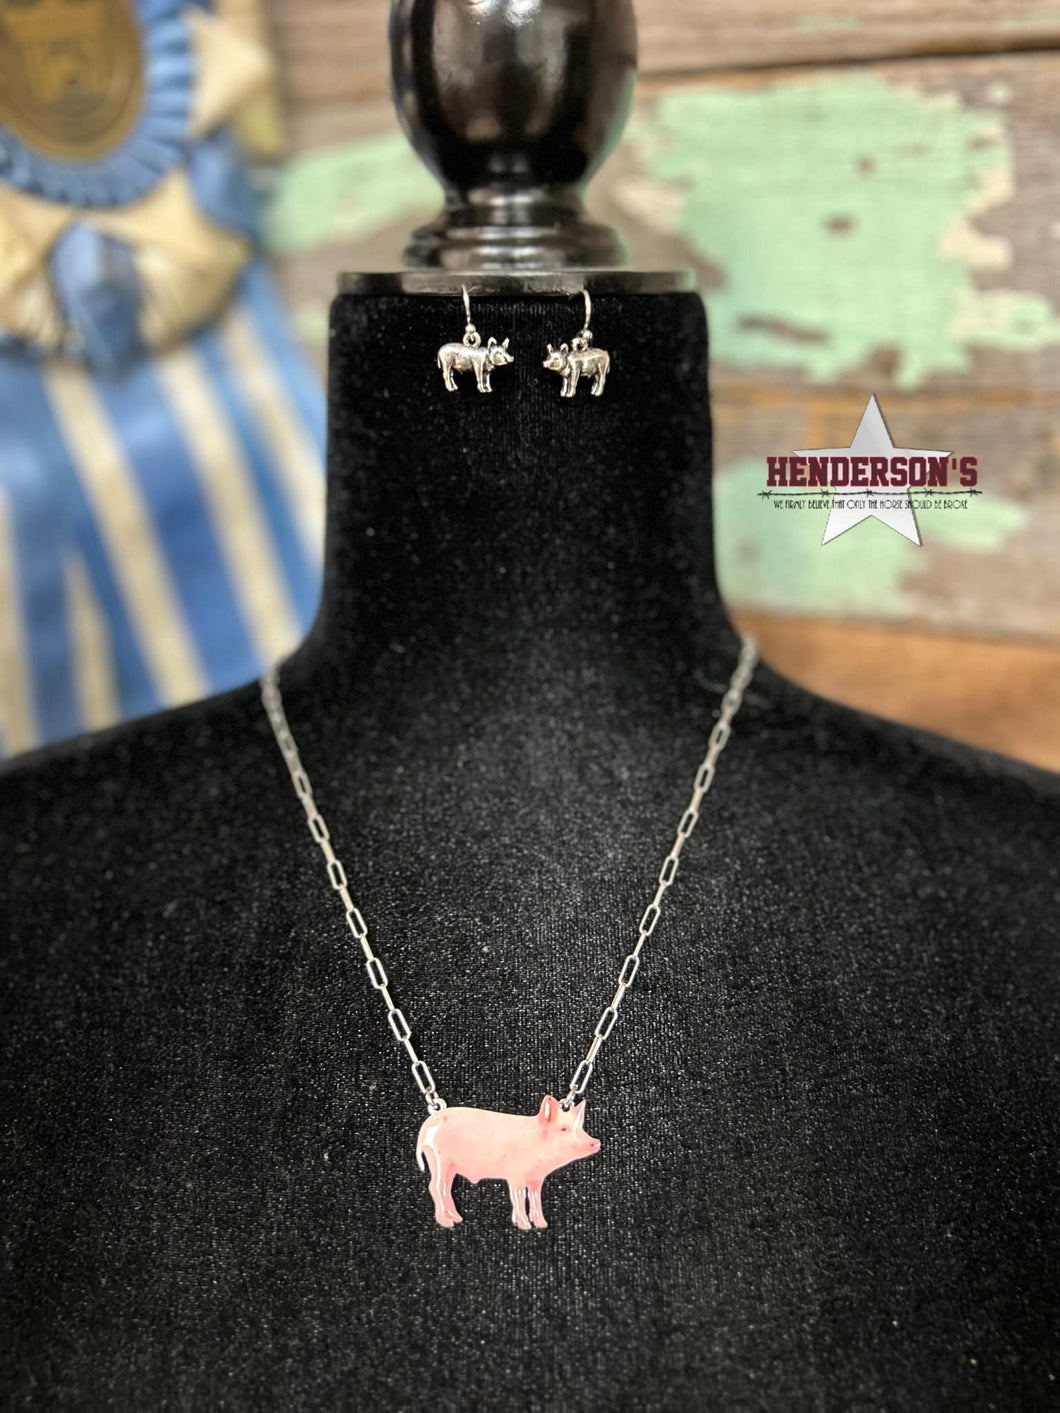 Pig Necklace Set - Henderson's Western Store